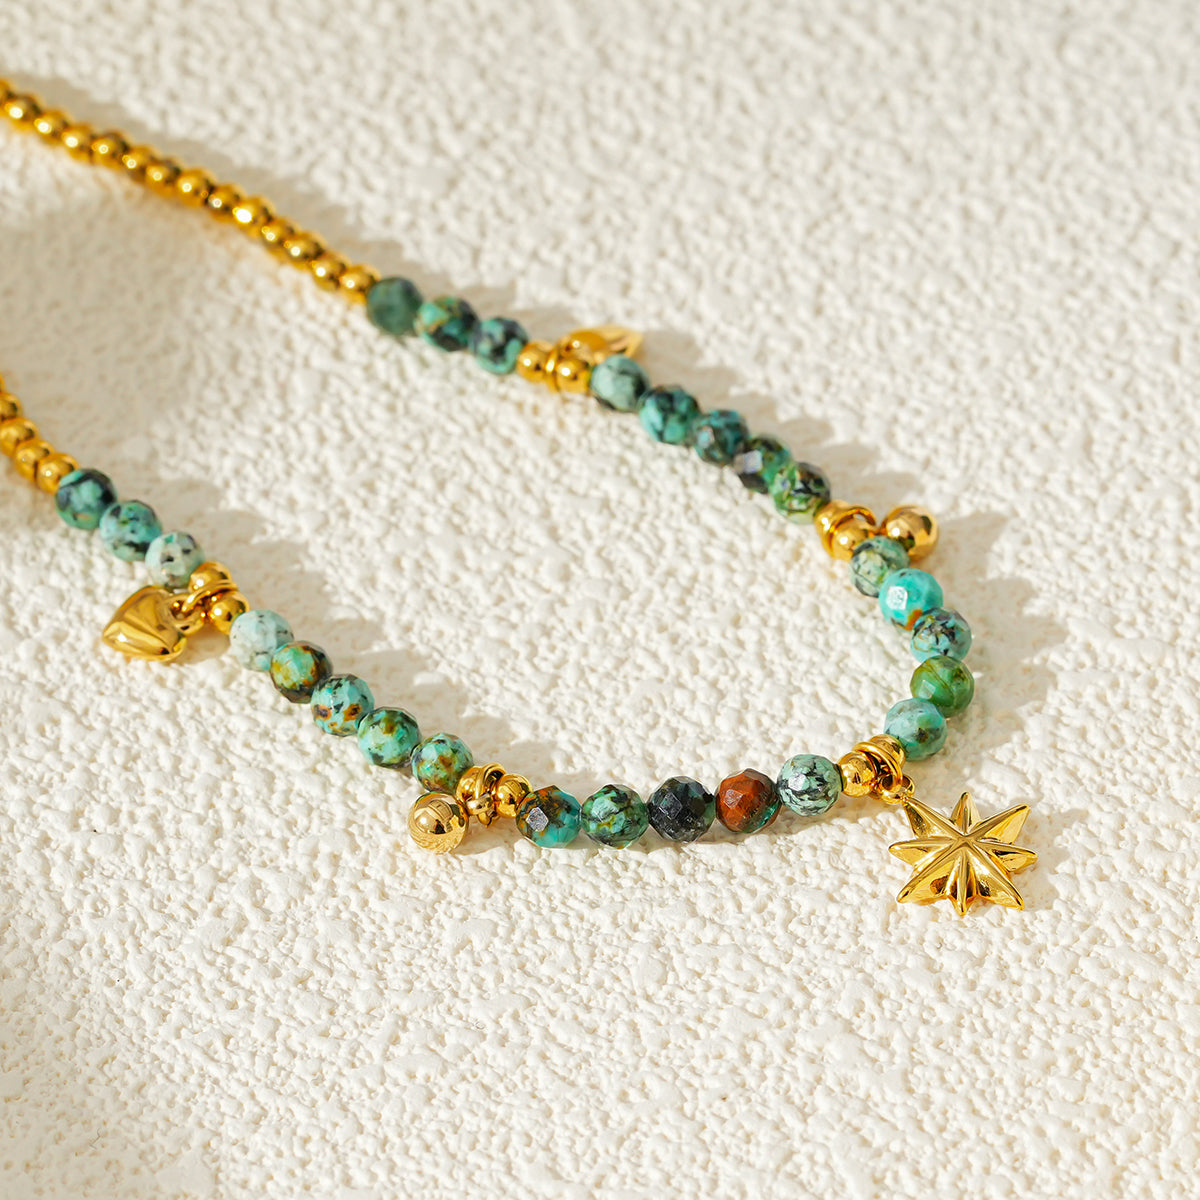 Style KAVYA LG 9861: Blue Turquoise Stones with Gold Beads &amp; Charms Chain Anklet.